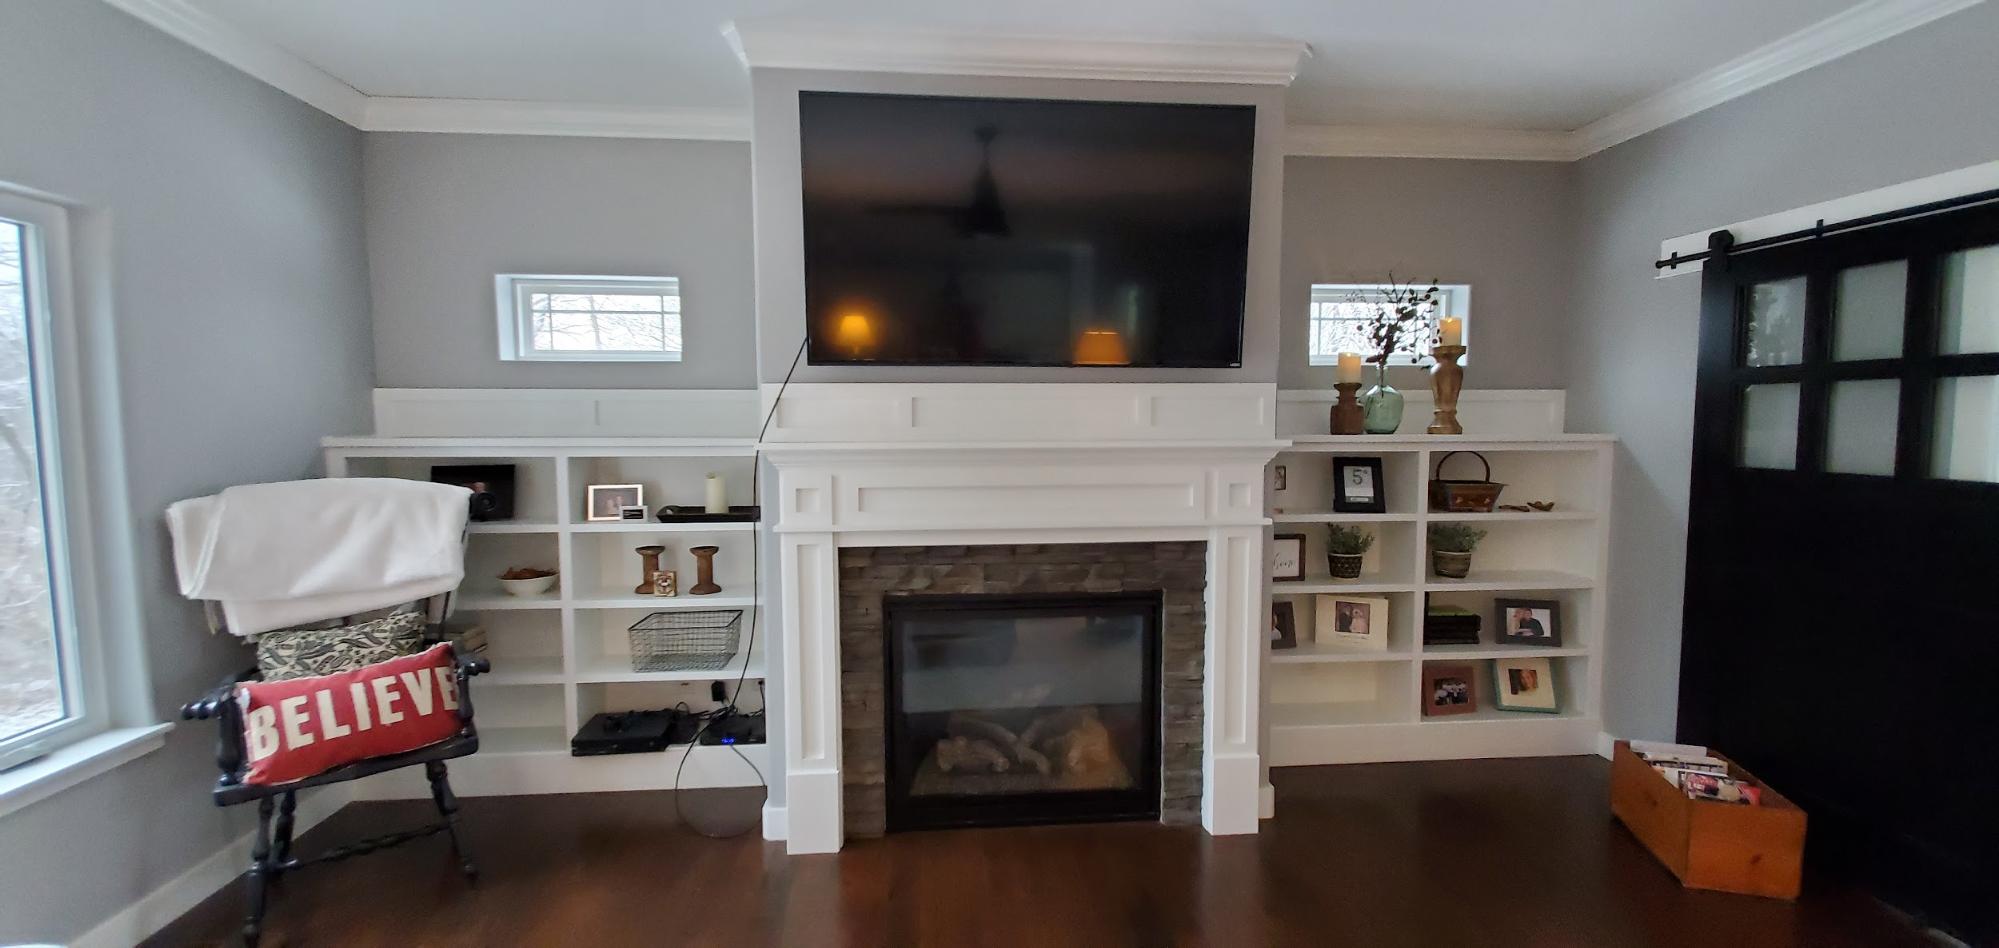 Kitchen + Fireplace Surround + Great Room Remodel